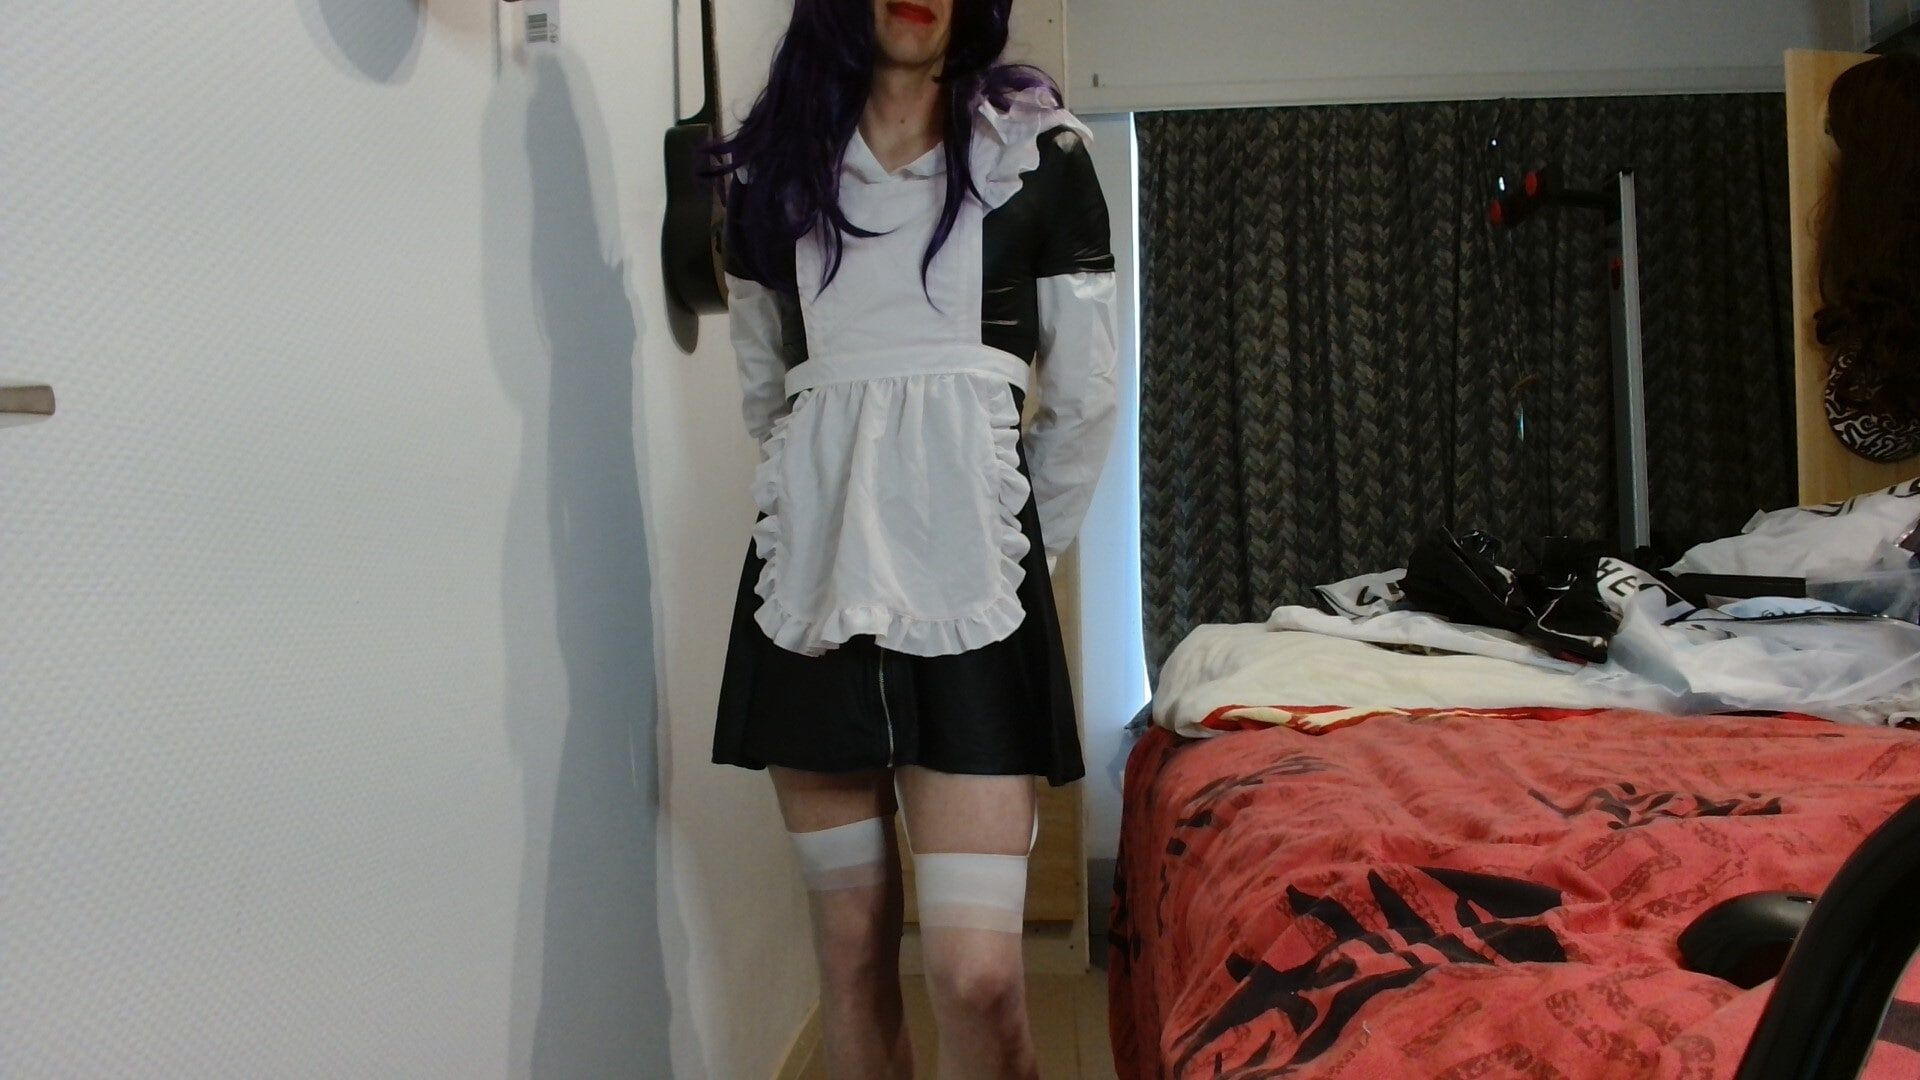 maid outfit #3